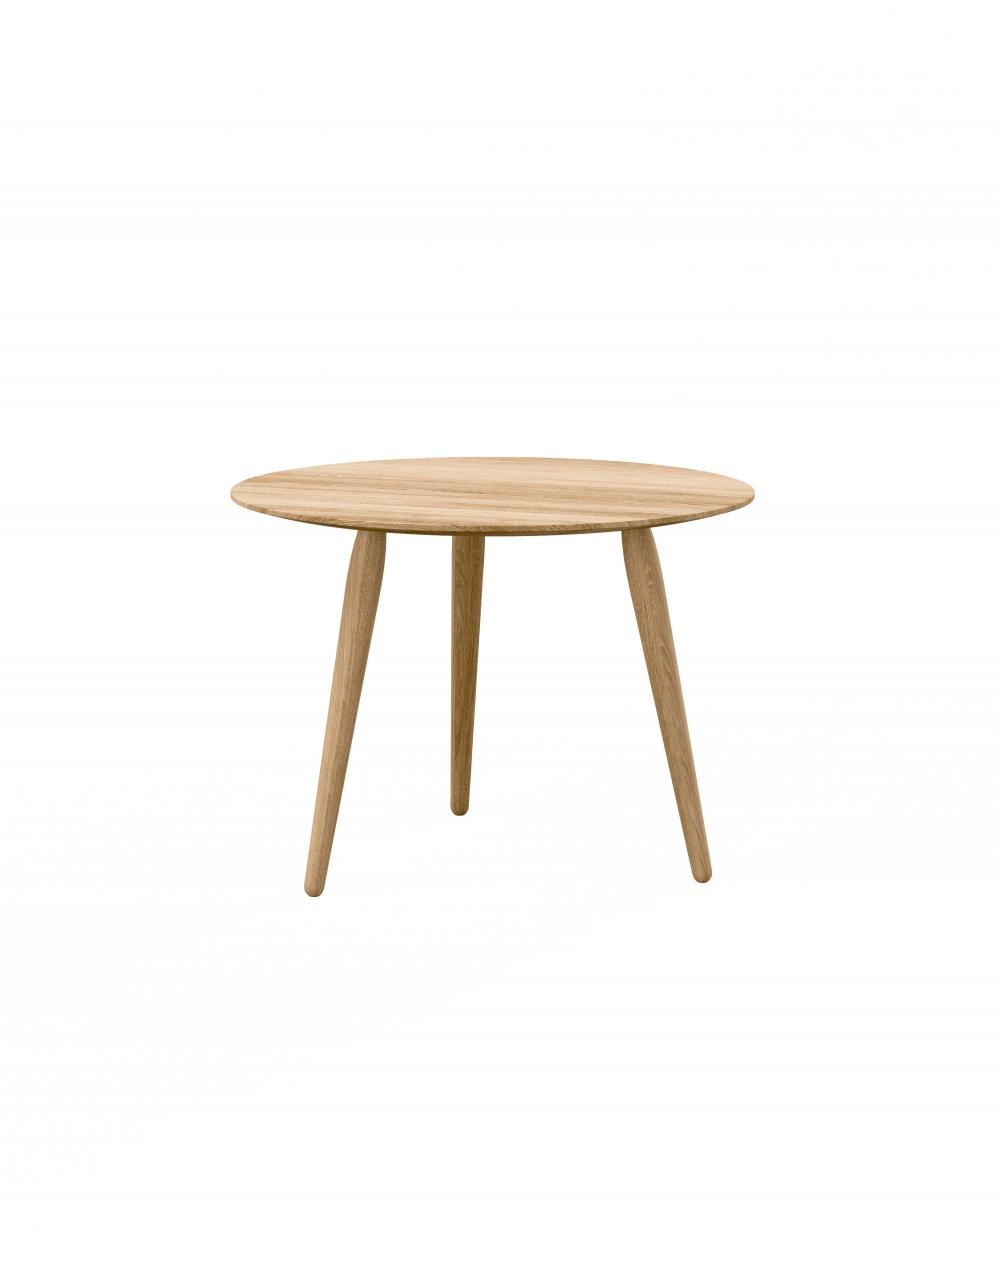 Playround Coffee Table Small White Oiled Oak 44cm